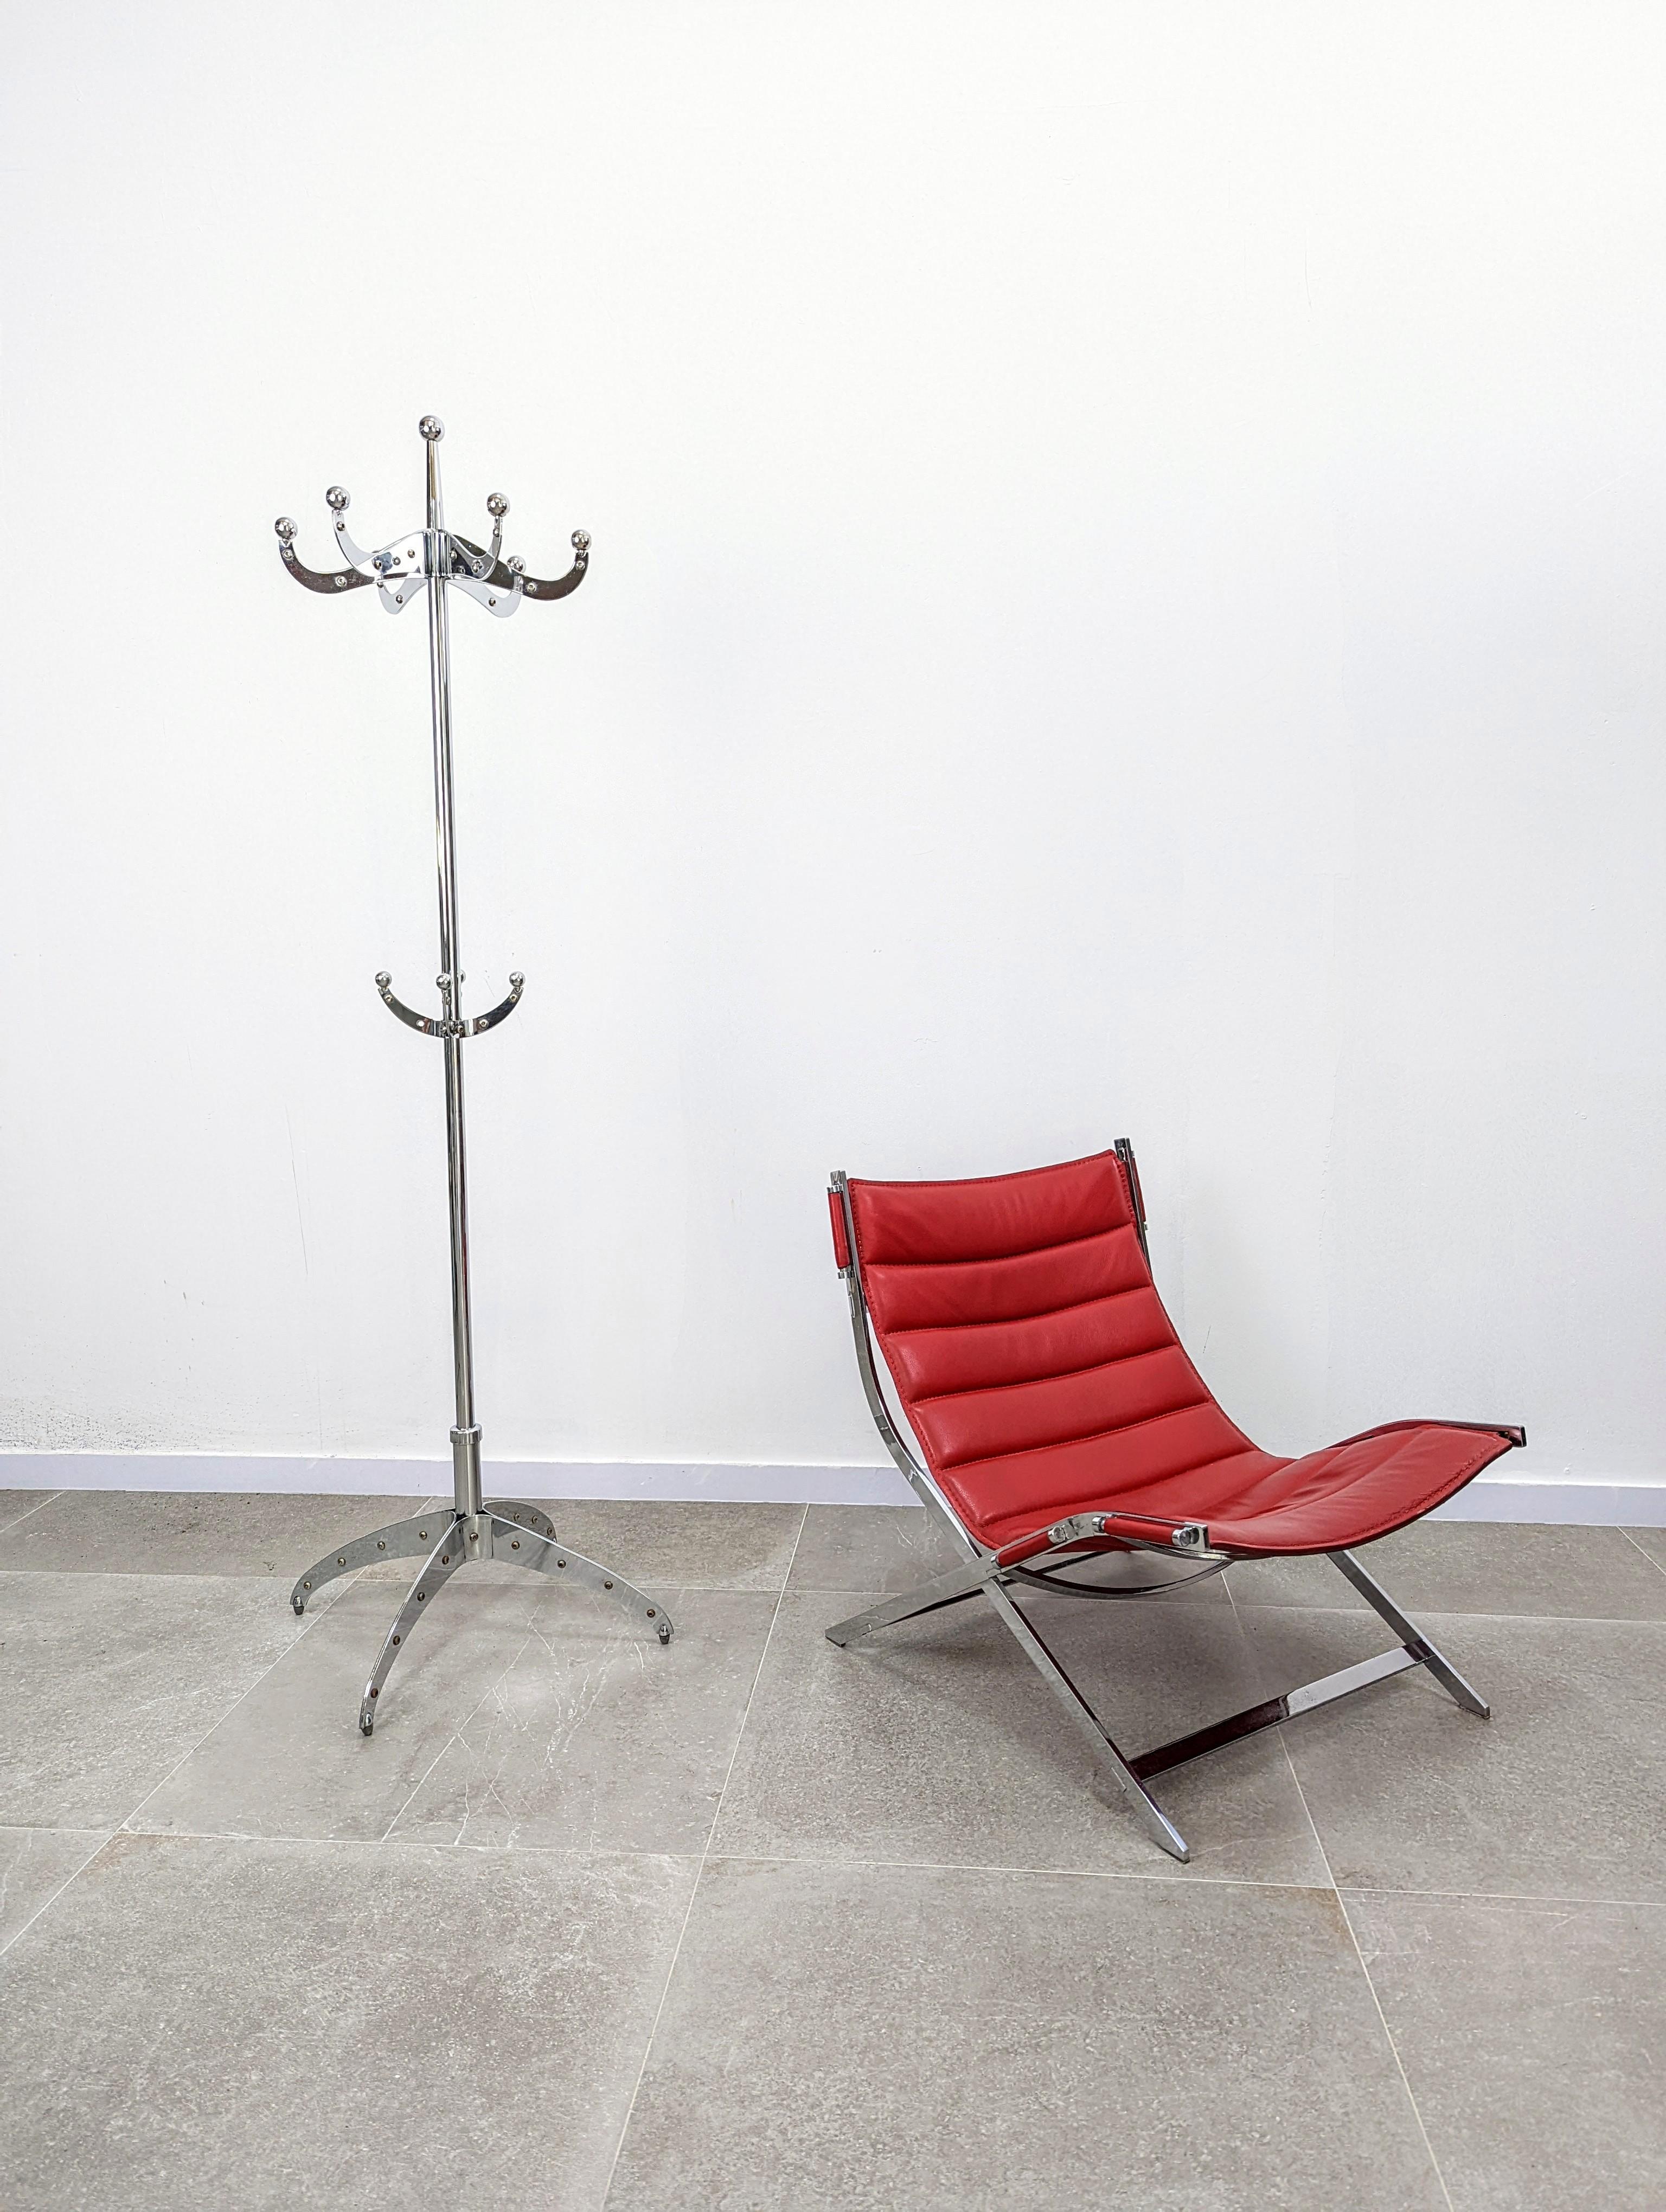 Fabulous chrome Dulton coat rack designed by Yasu Sasamoto and manufactured by Li Qian in the 80s. With this Sasamoto piece I combine the elegance of its curved designs with the strength and character of its chrome pieces joined by steel screws, so